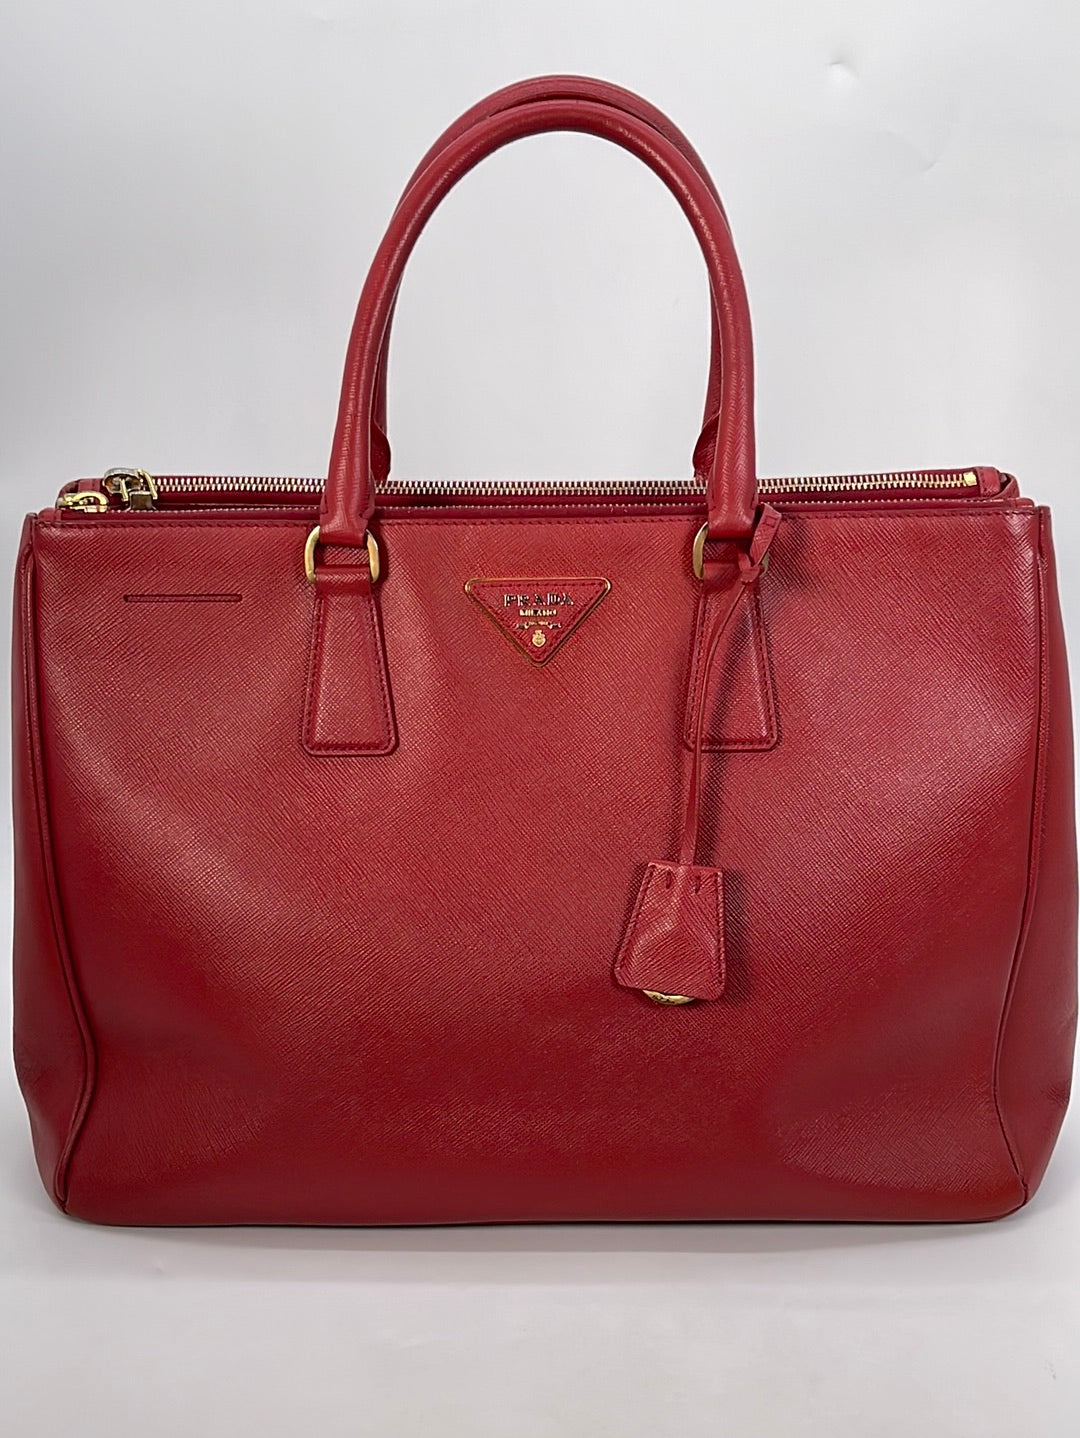 Preloved Prada Red Saffiano Leather Double Zip Tote Bag 7 030223 –  KimmieBBags LLC